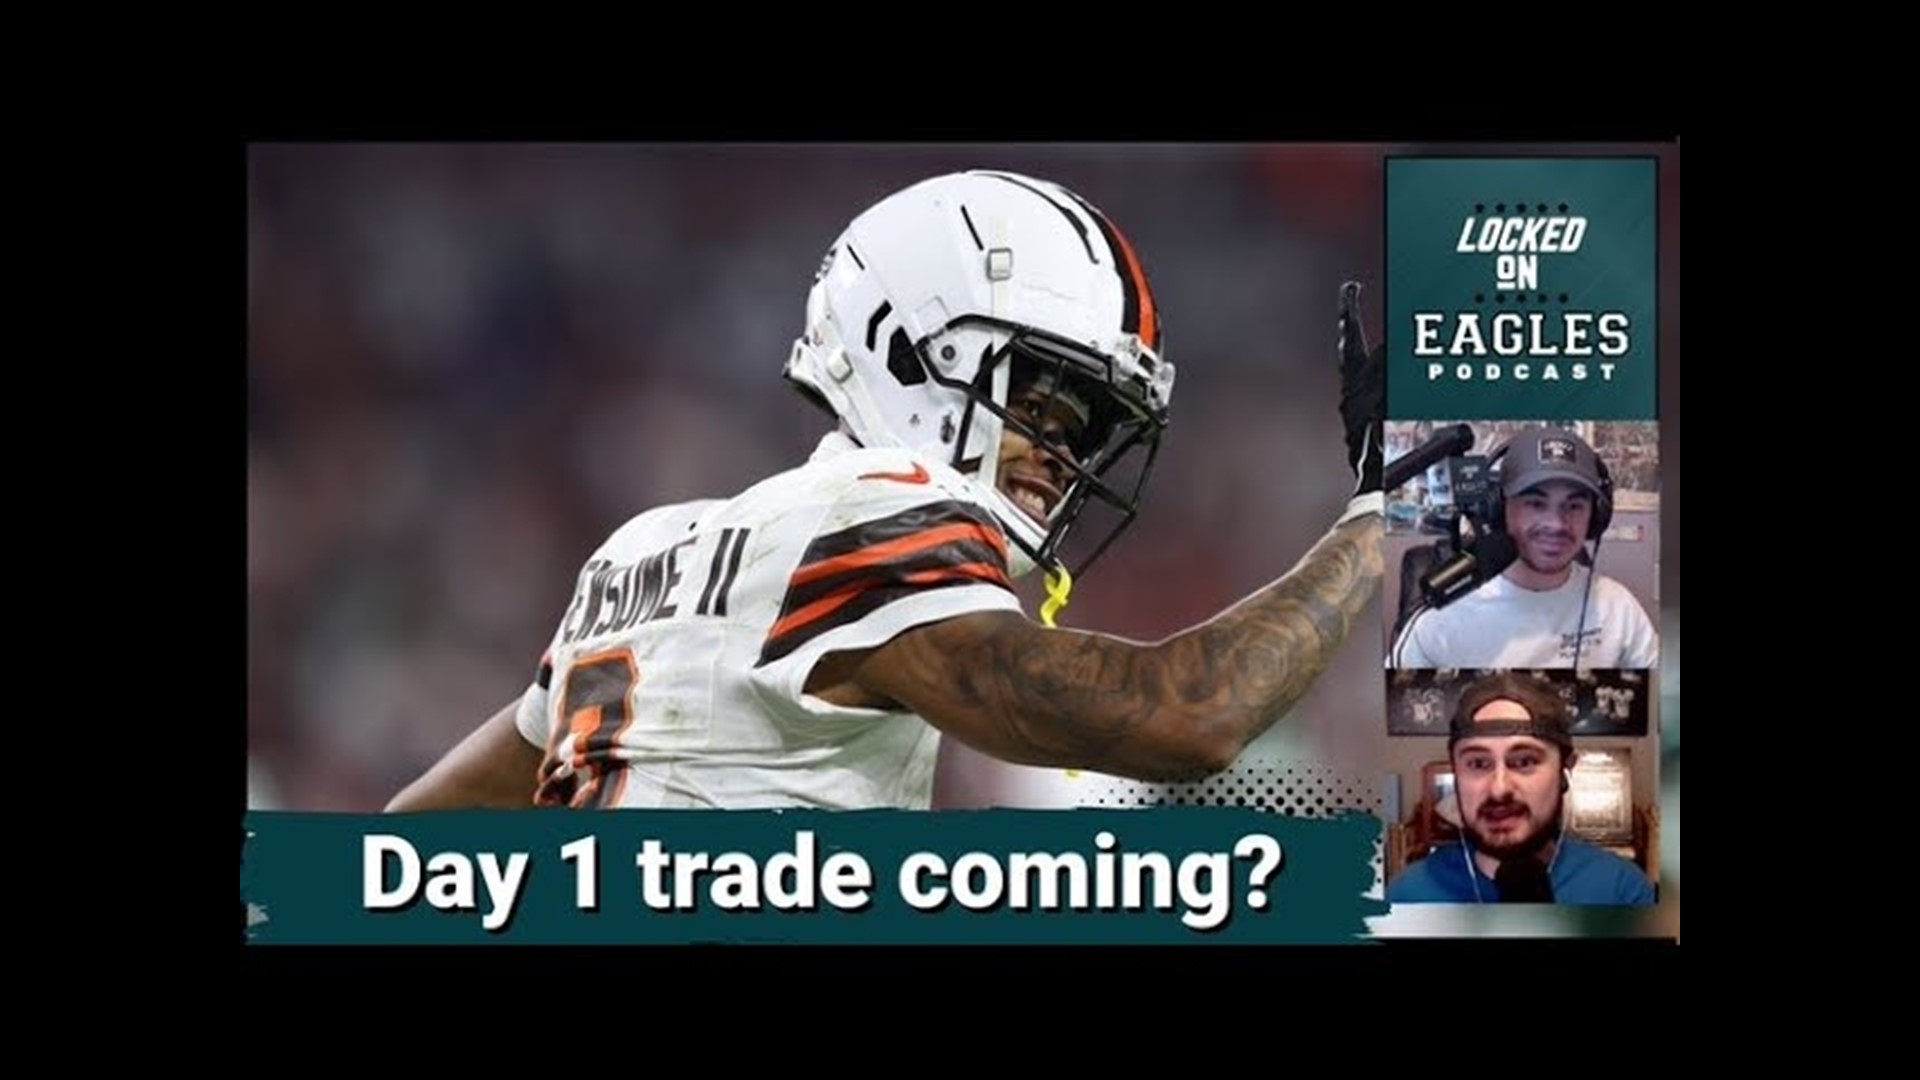 Howie Roseman is not shy to a draft day trade. Going back a few years, Howie Roseman shocked the NFL world when he pulled off a trade for A.J. Brown.